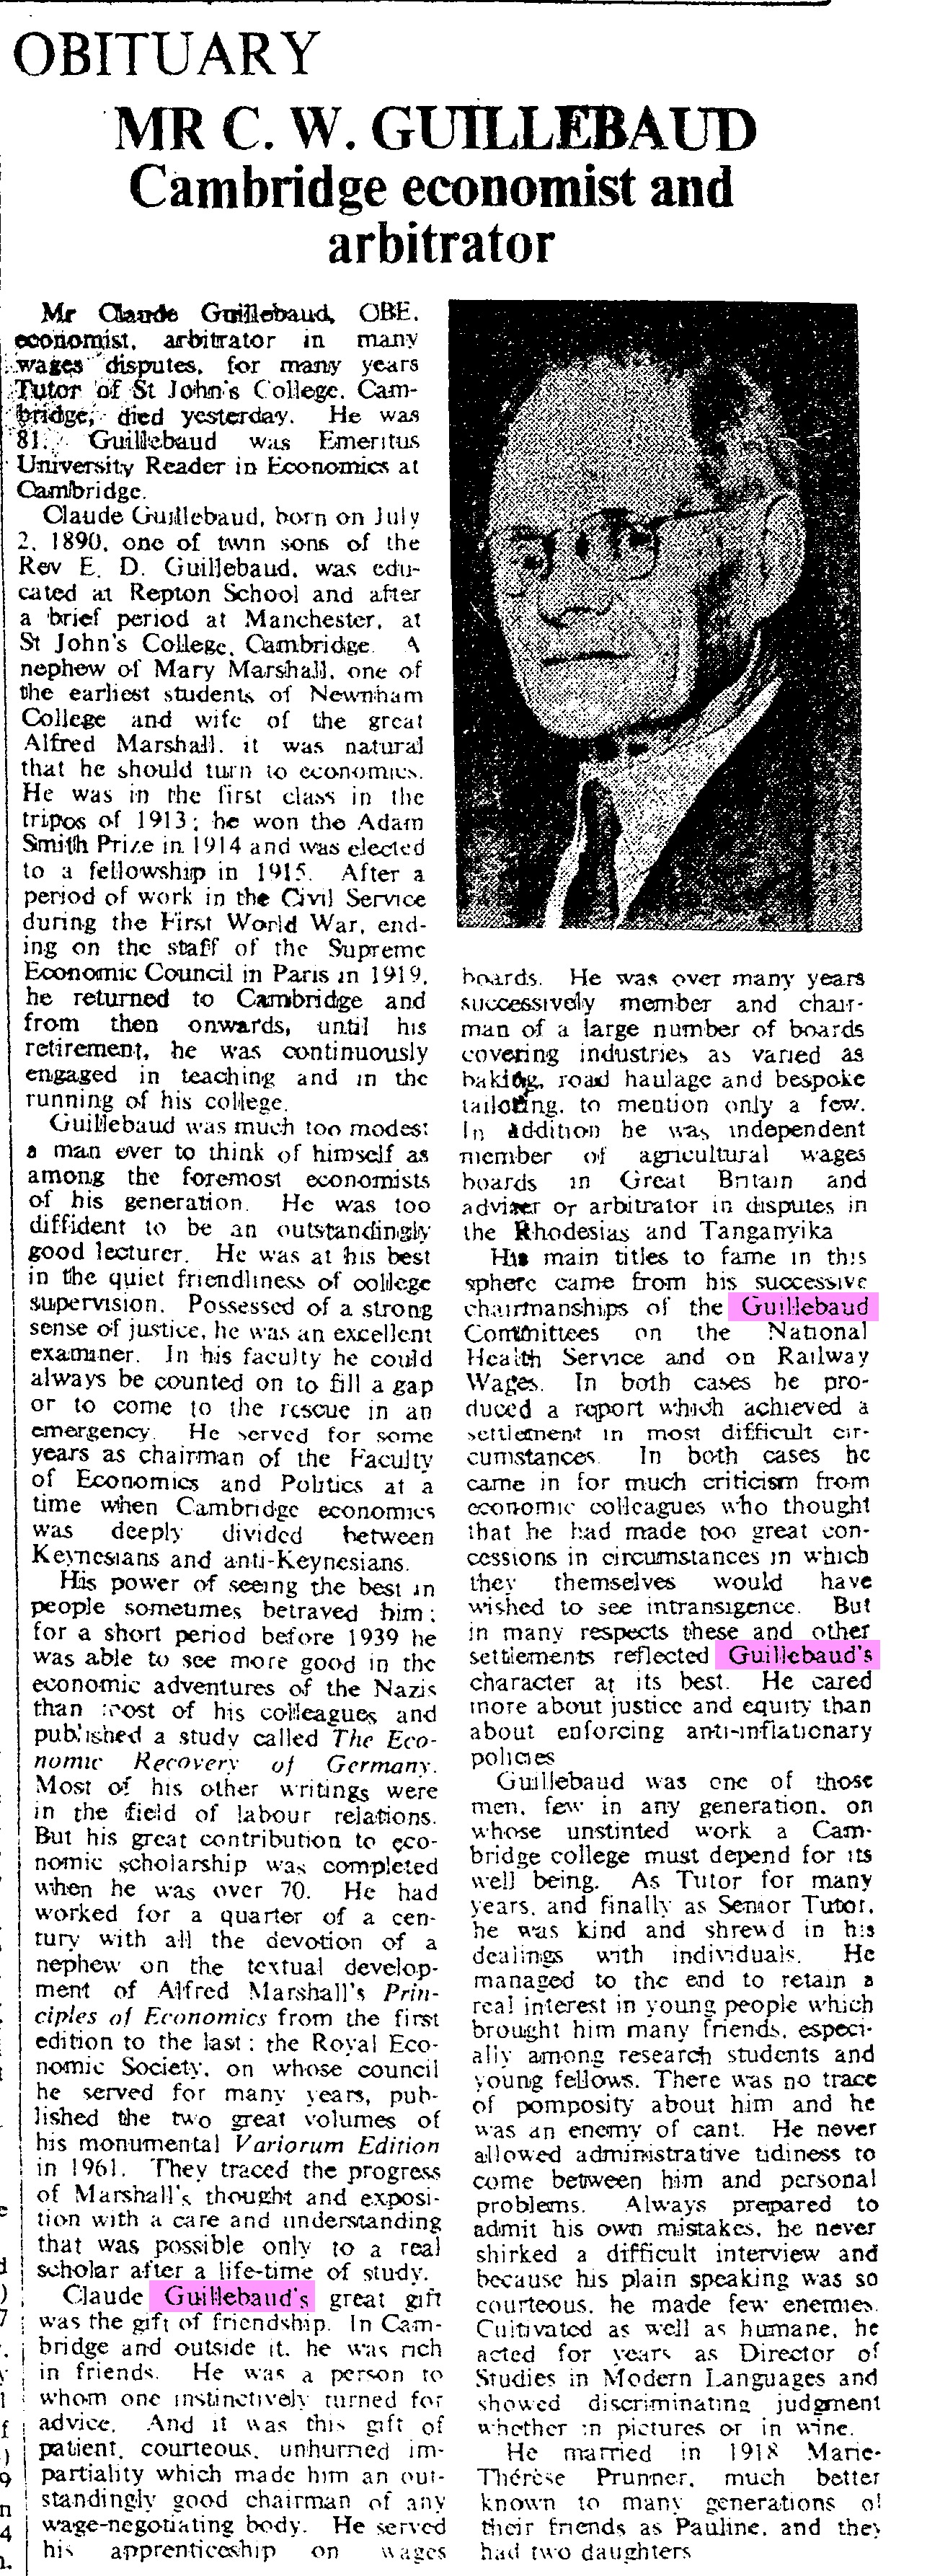 The obituary of Claude Guillebaud, economist, in The Times, 24 Aug 1971